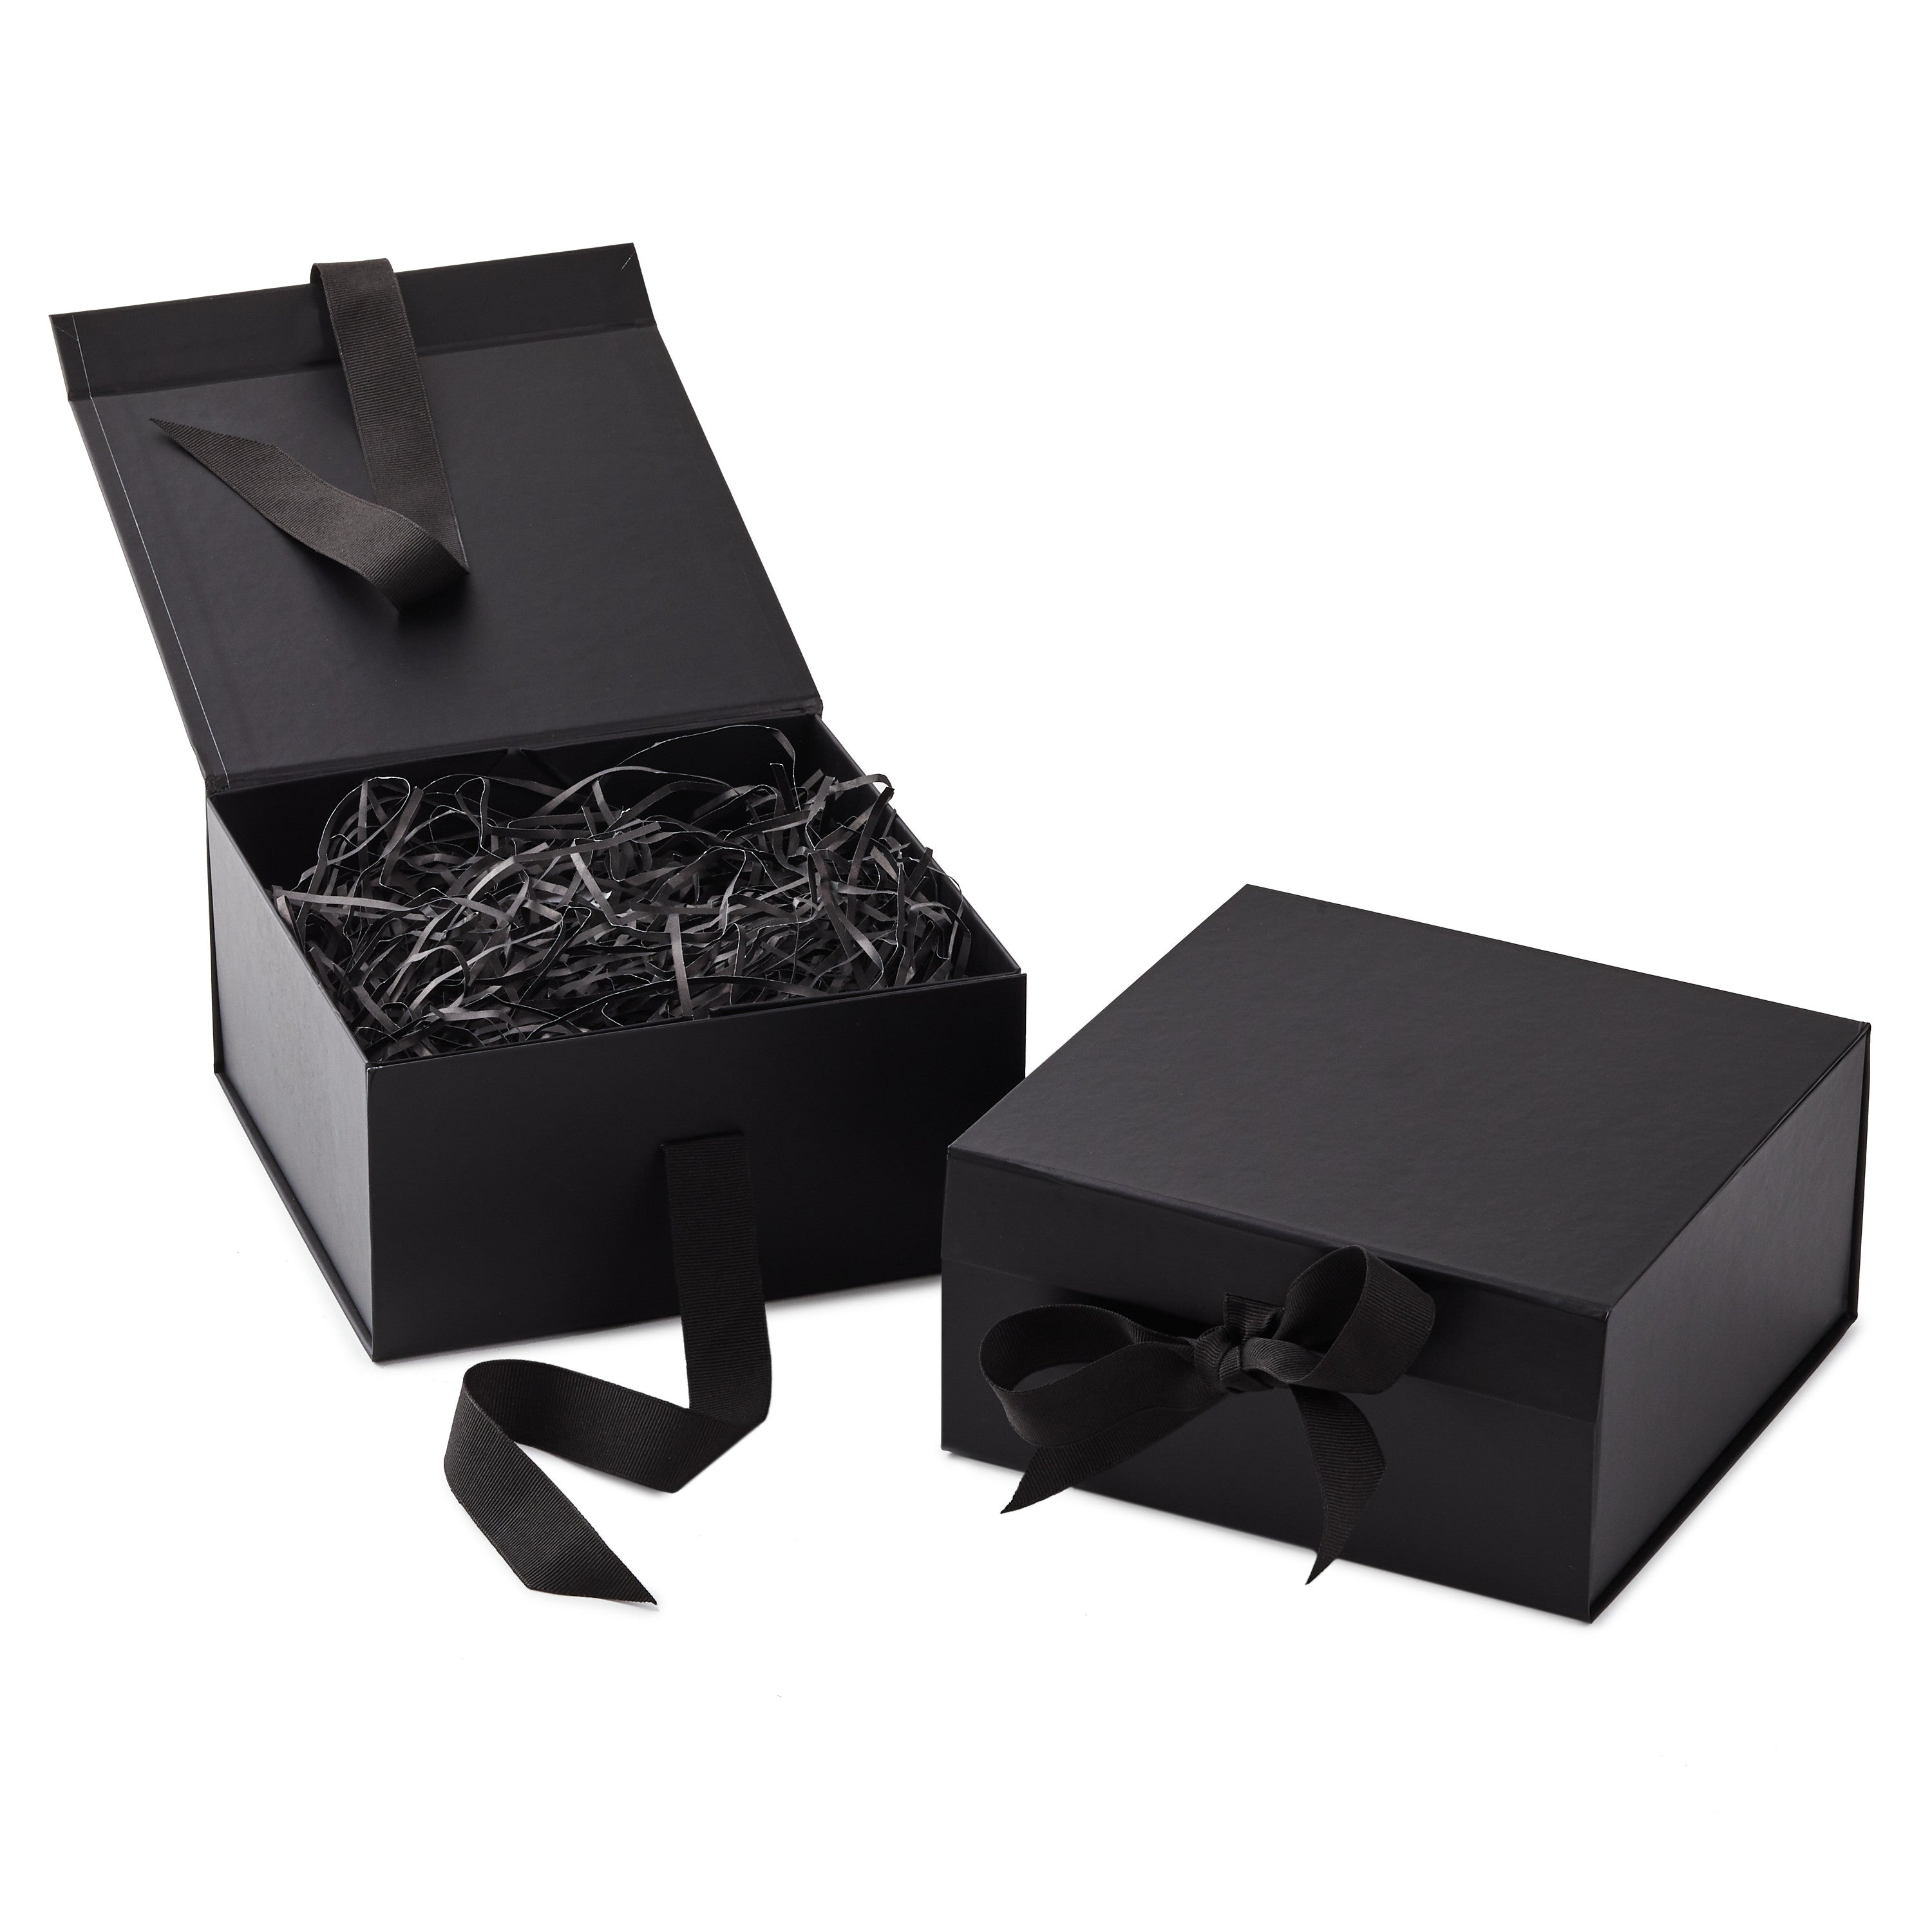 Hallmark Foldable Gift Box Bundle (2 Matching Boxes with Ribbon: Solid Black) for Weddings, Groomsmen Gifts, Engagements, Graduations